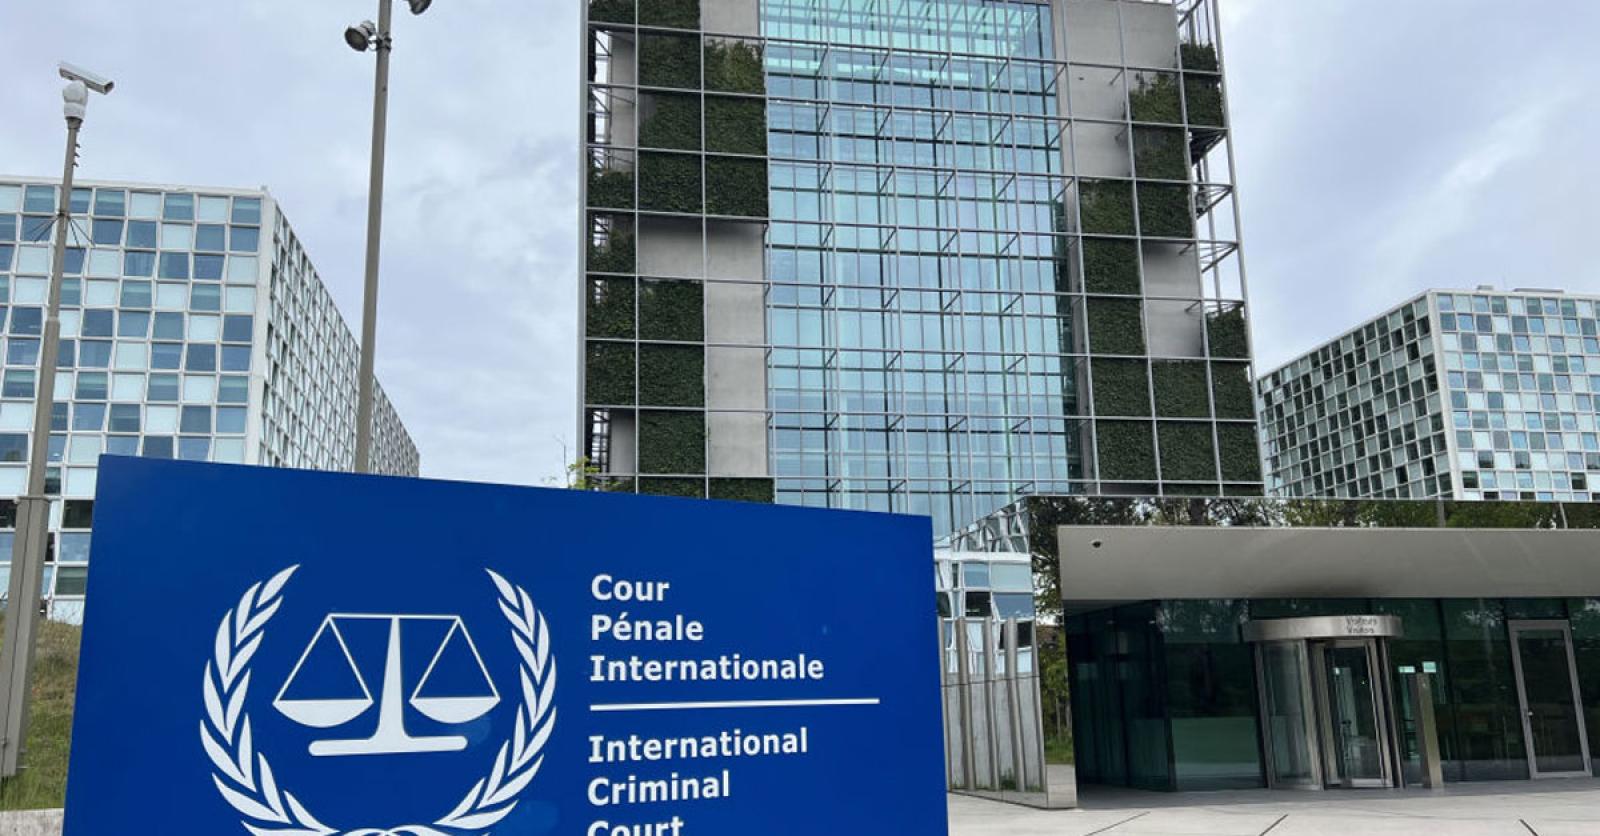 The United States only supports the International Criminal Court if it agrees with them.